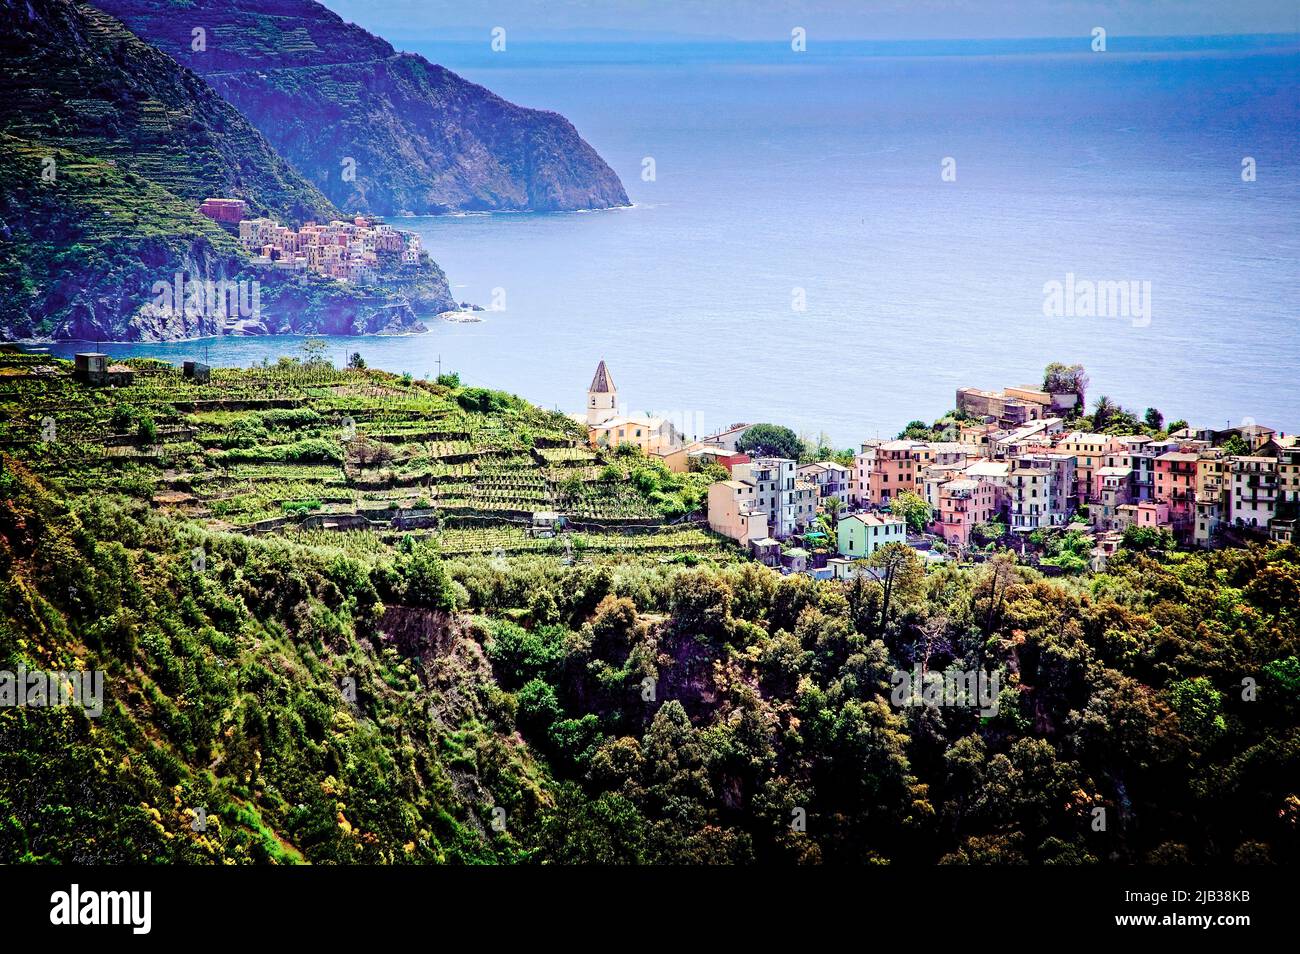 The seaside town of Corniglia is a part of the Cinque Terre in Liguria, Italy. Stock Photo